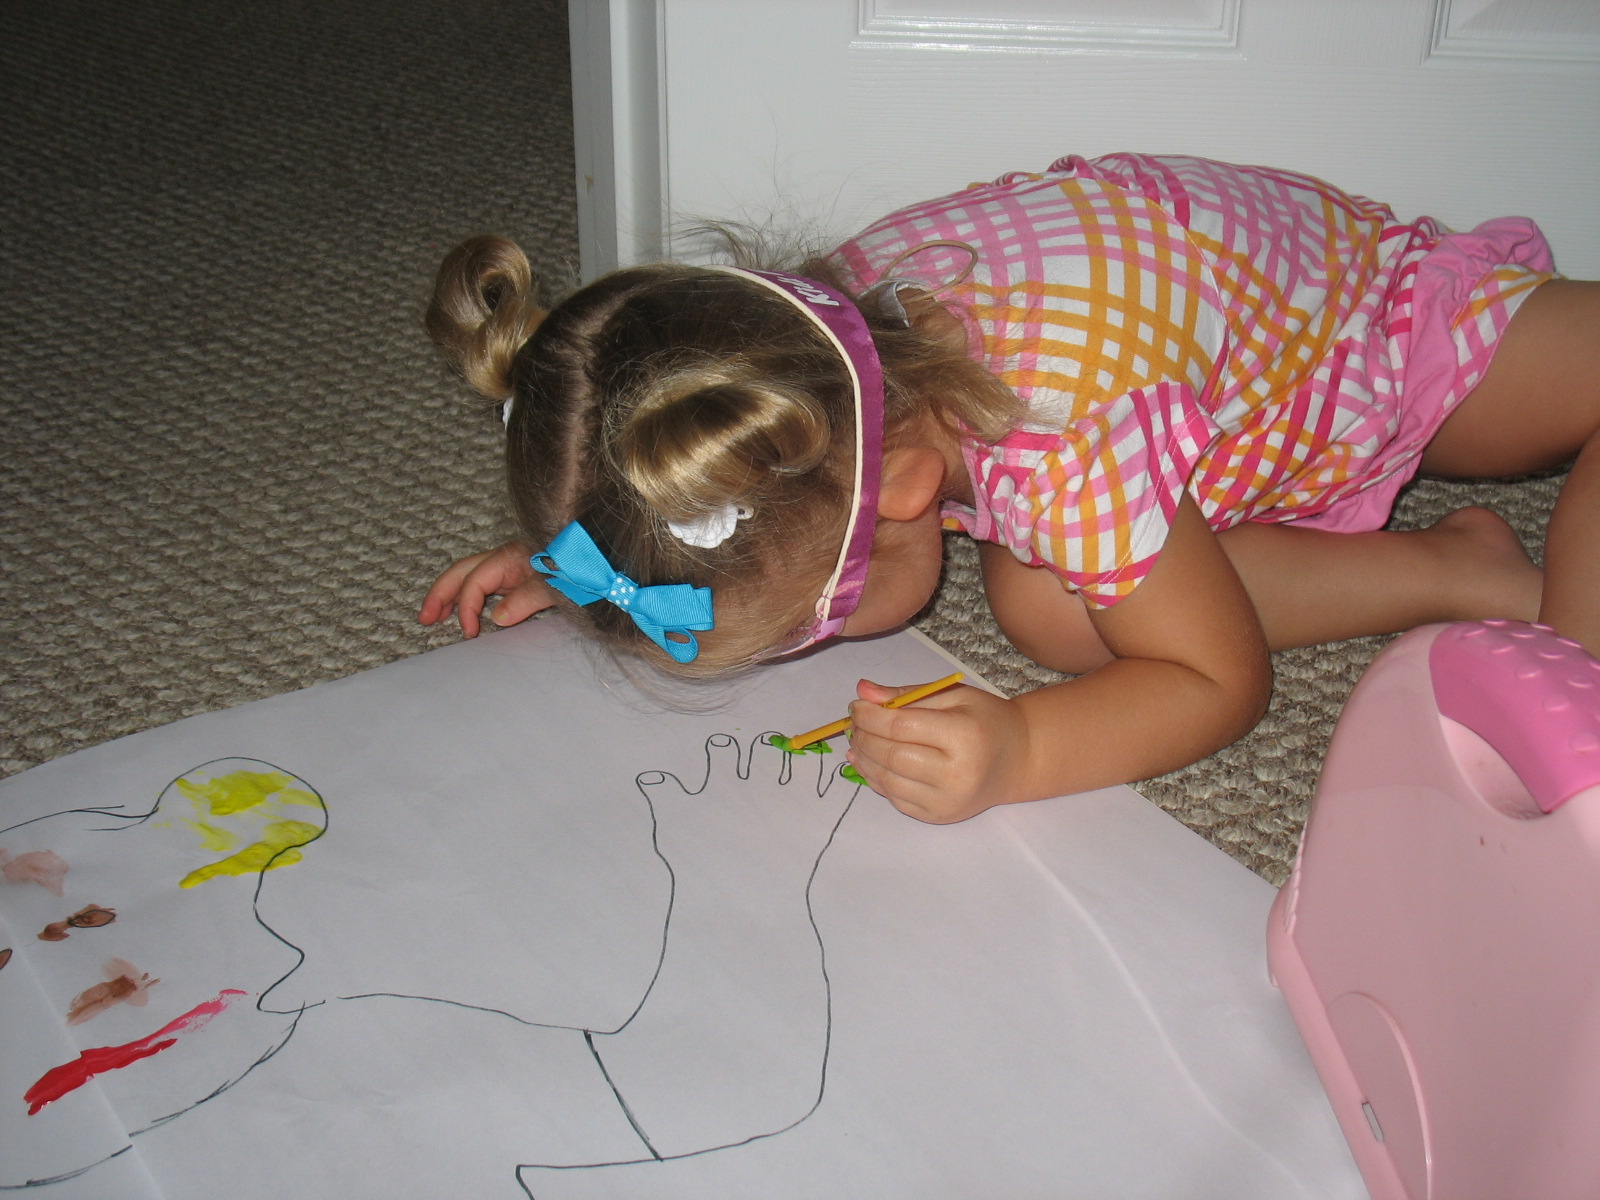 A young girl in pigtails is sitting on the floor drawing a life-sized picture of herself on a very large piece of paper.